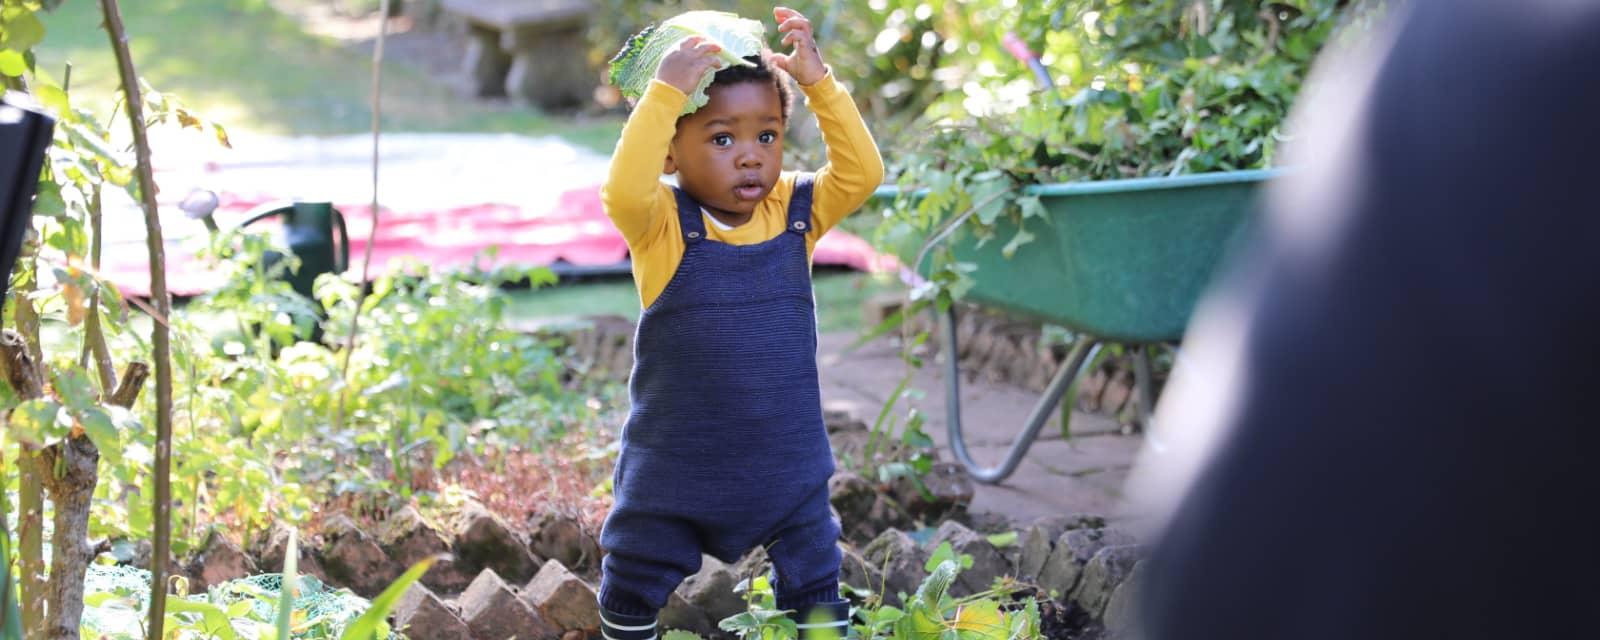 Baby playing in a garden